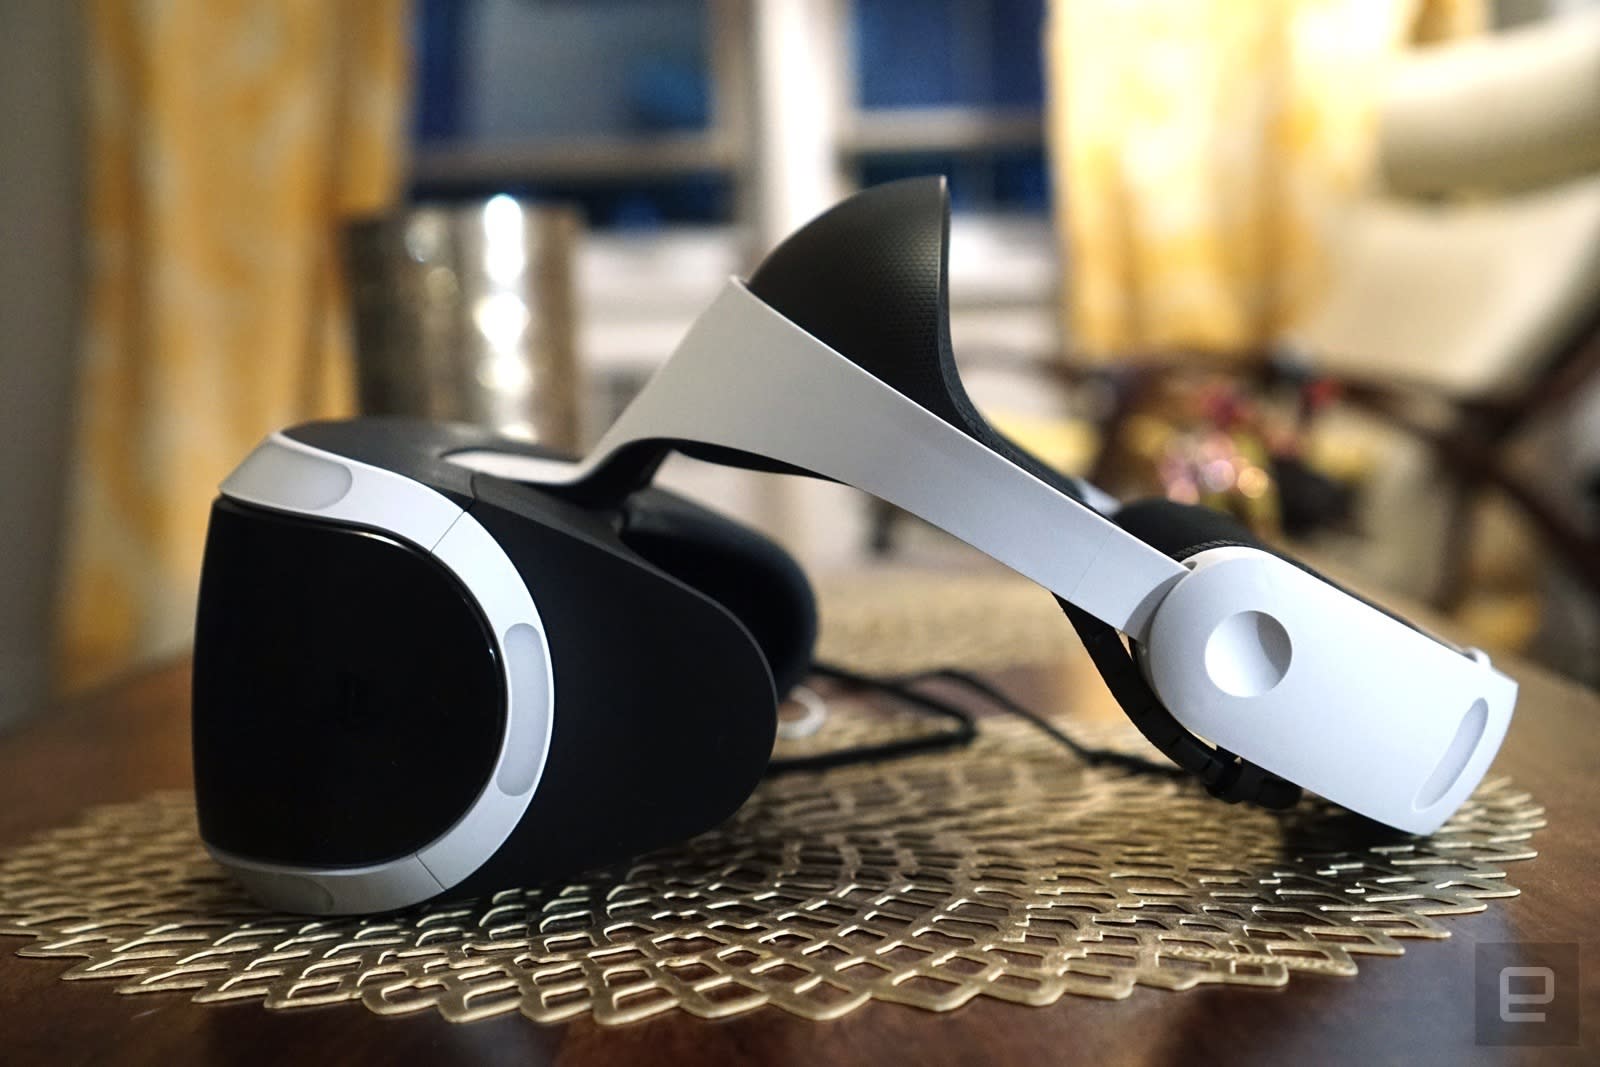 Sony reportedly showed off its next-know-how PSVR at a developer’s conference